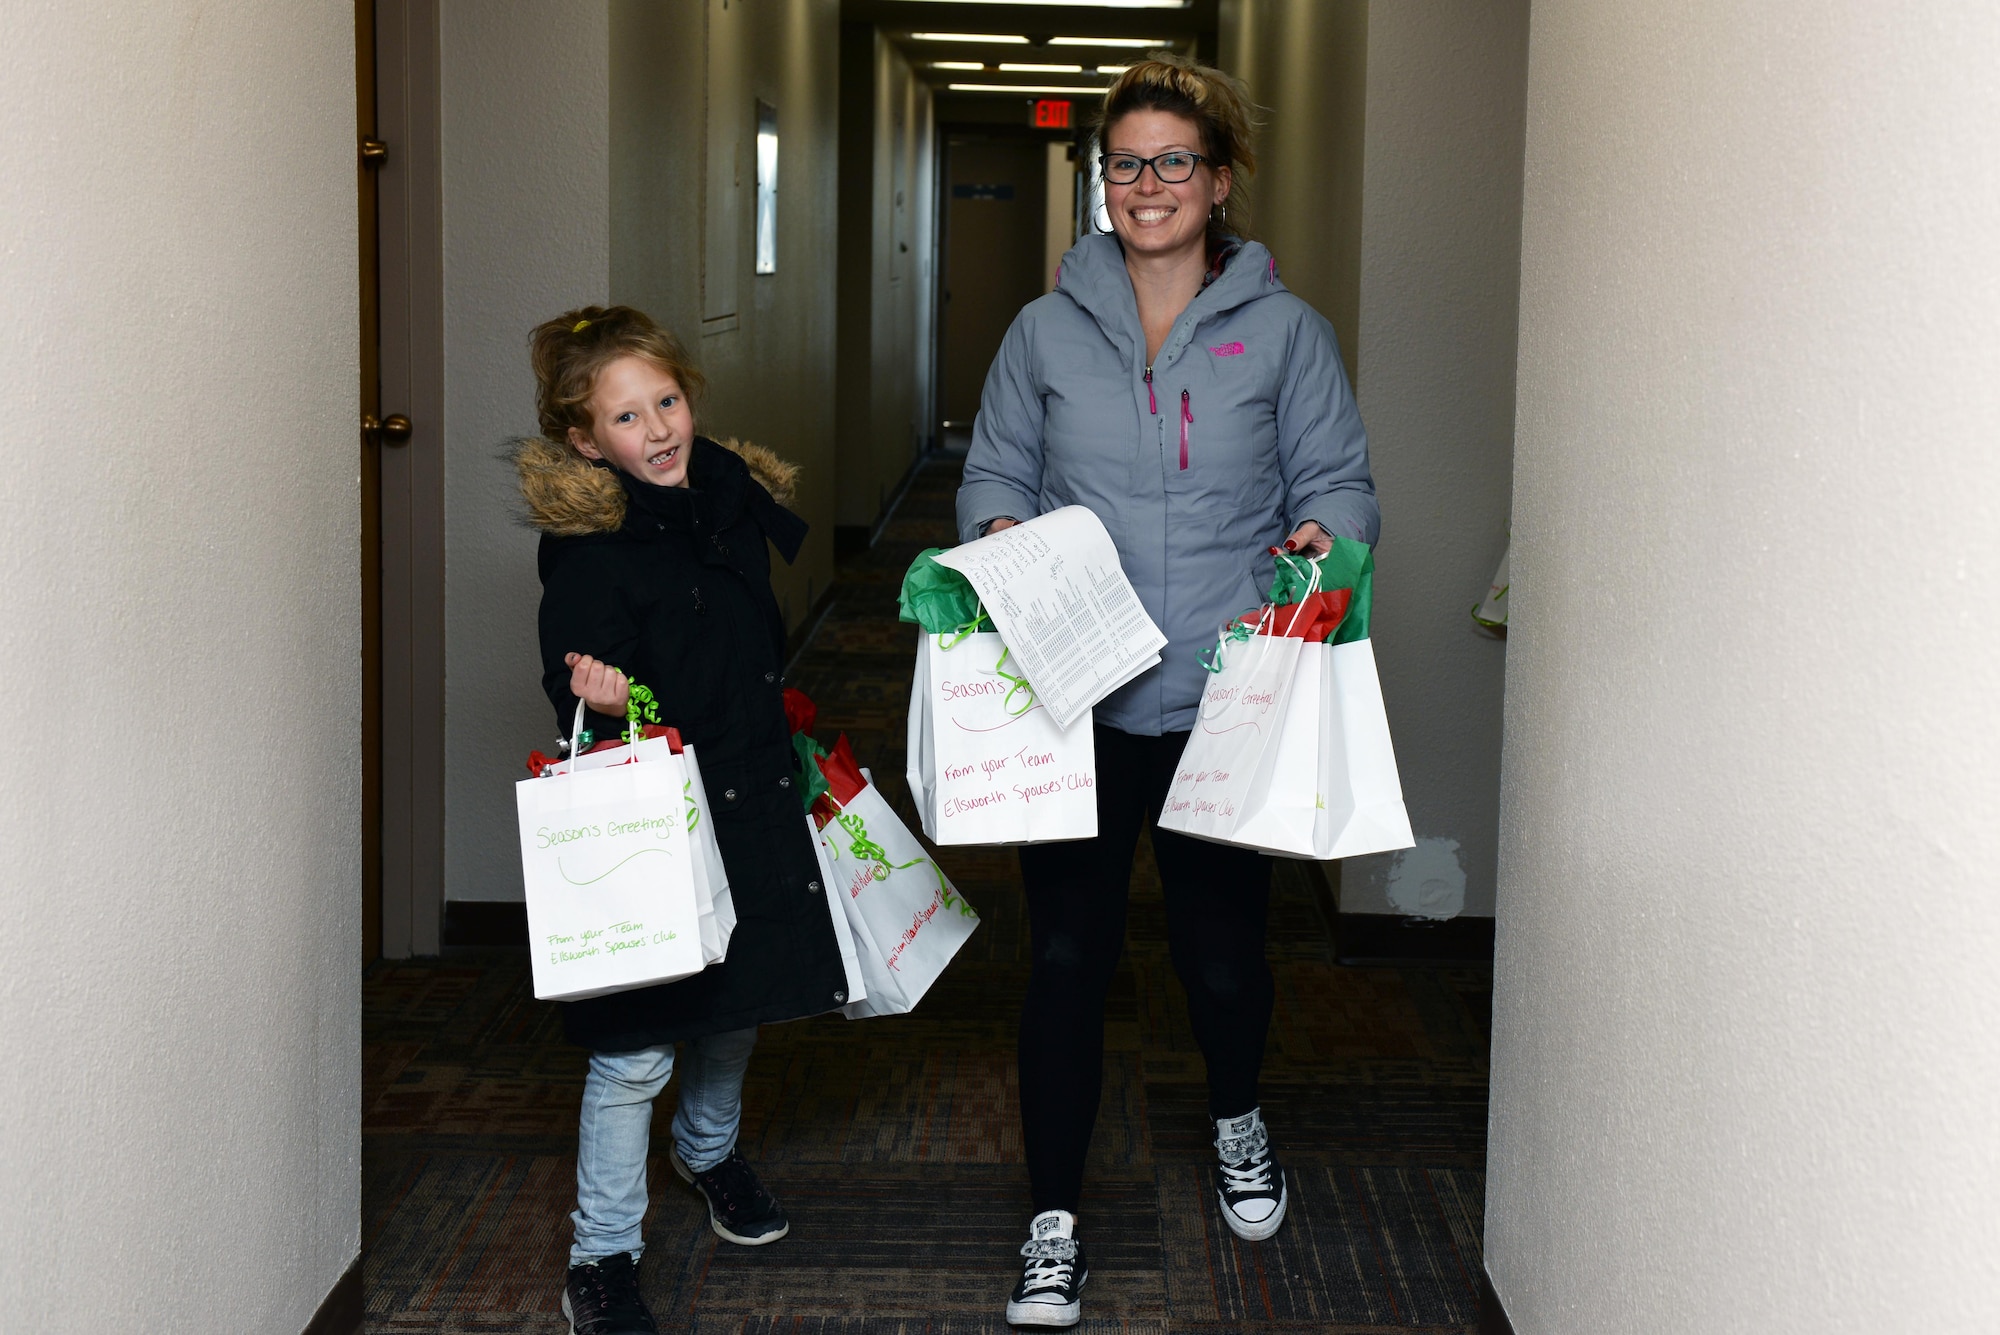 Heather Ryan, the Ellsworth Spouse’s Club Fundraising chairperson, and a student from the St. Paul’s School deliver cookies to Airmen residing in the dormitories at Ellsworth Air Force Base, S.D., Dec. 9, 2019. More than 12,000 cookies were packaged and delivered to more than 700 dorm Airmen, spreading holiday cheer to those away from their families this year. (U.S. Air Force photo by Airman Quentin K. Marx)